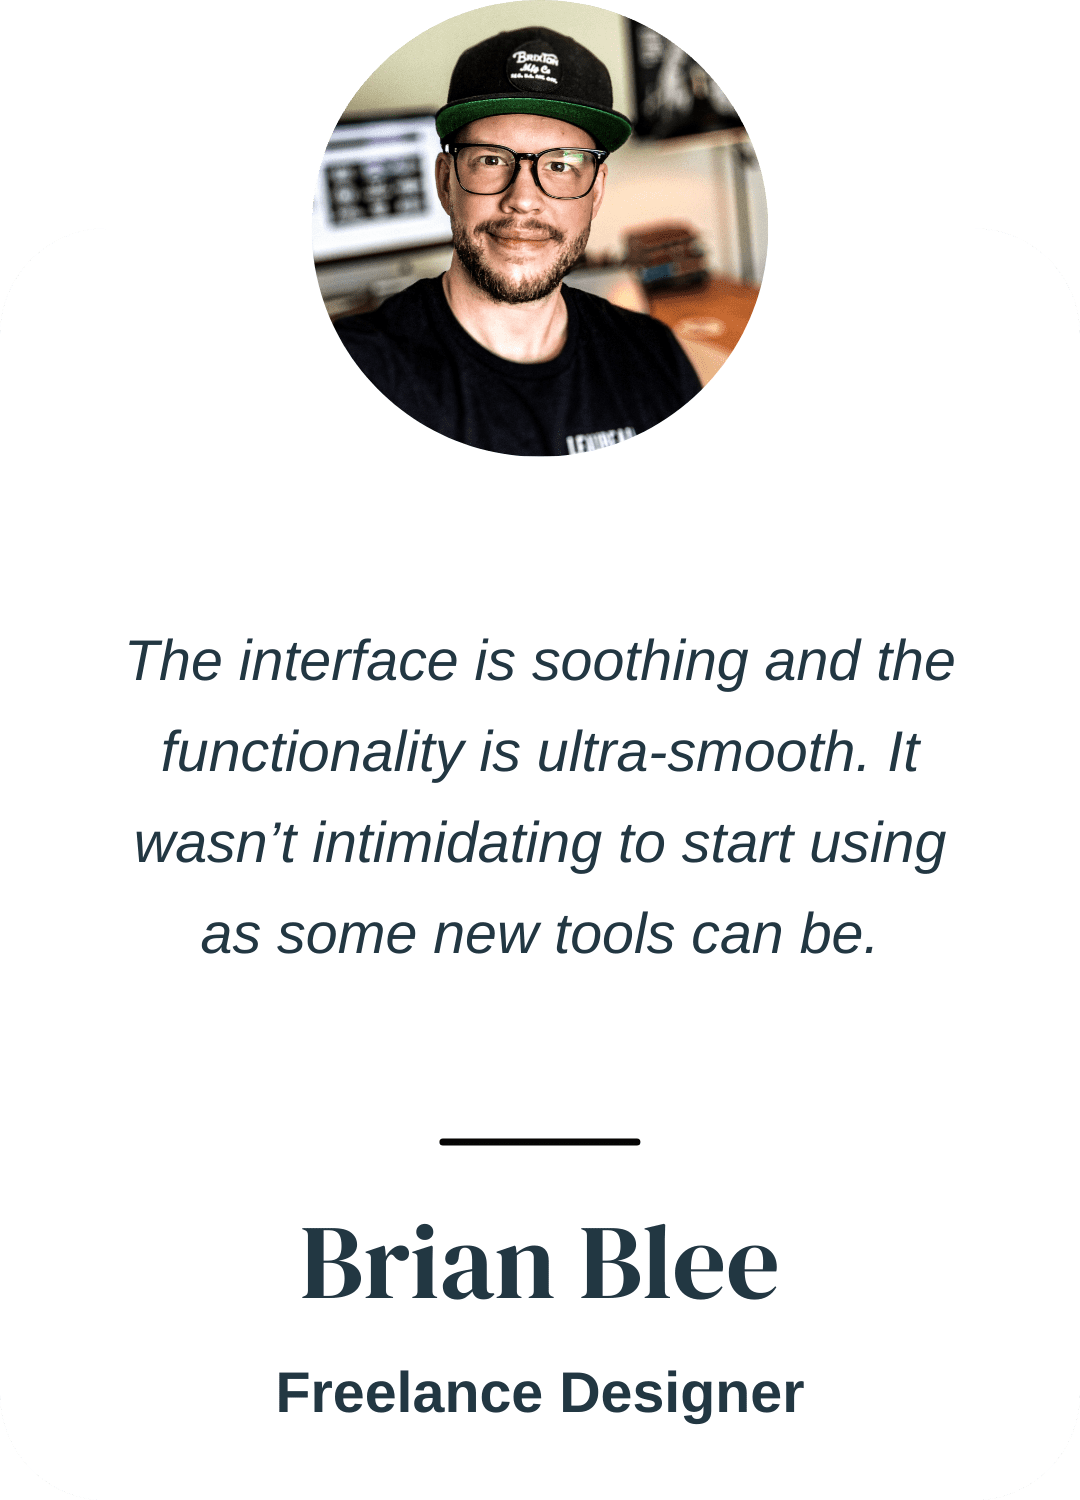 "The interface is soothing and the functionality is ultra-smooth. It wasn’t intimidating to start using as some new apps can be." Brian Blee, Freelance Designer